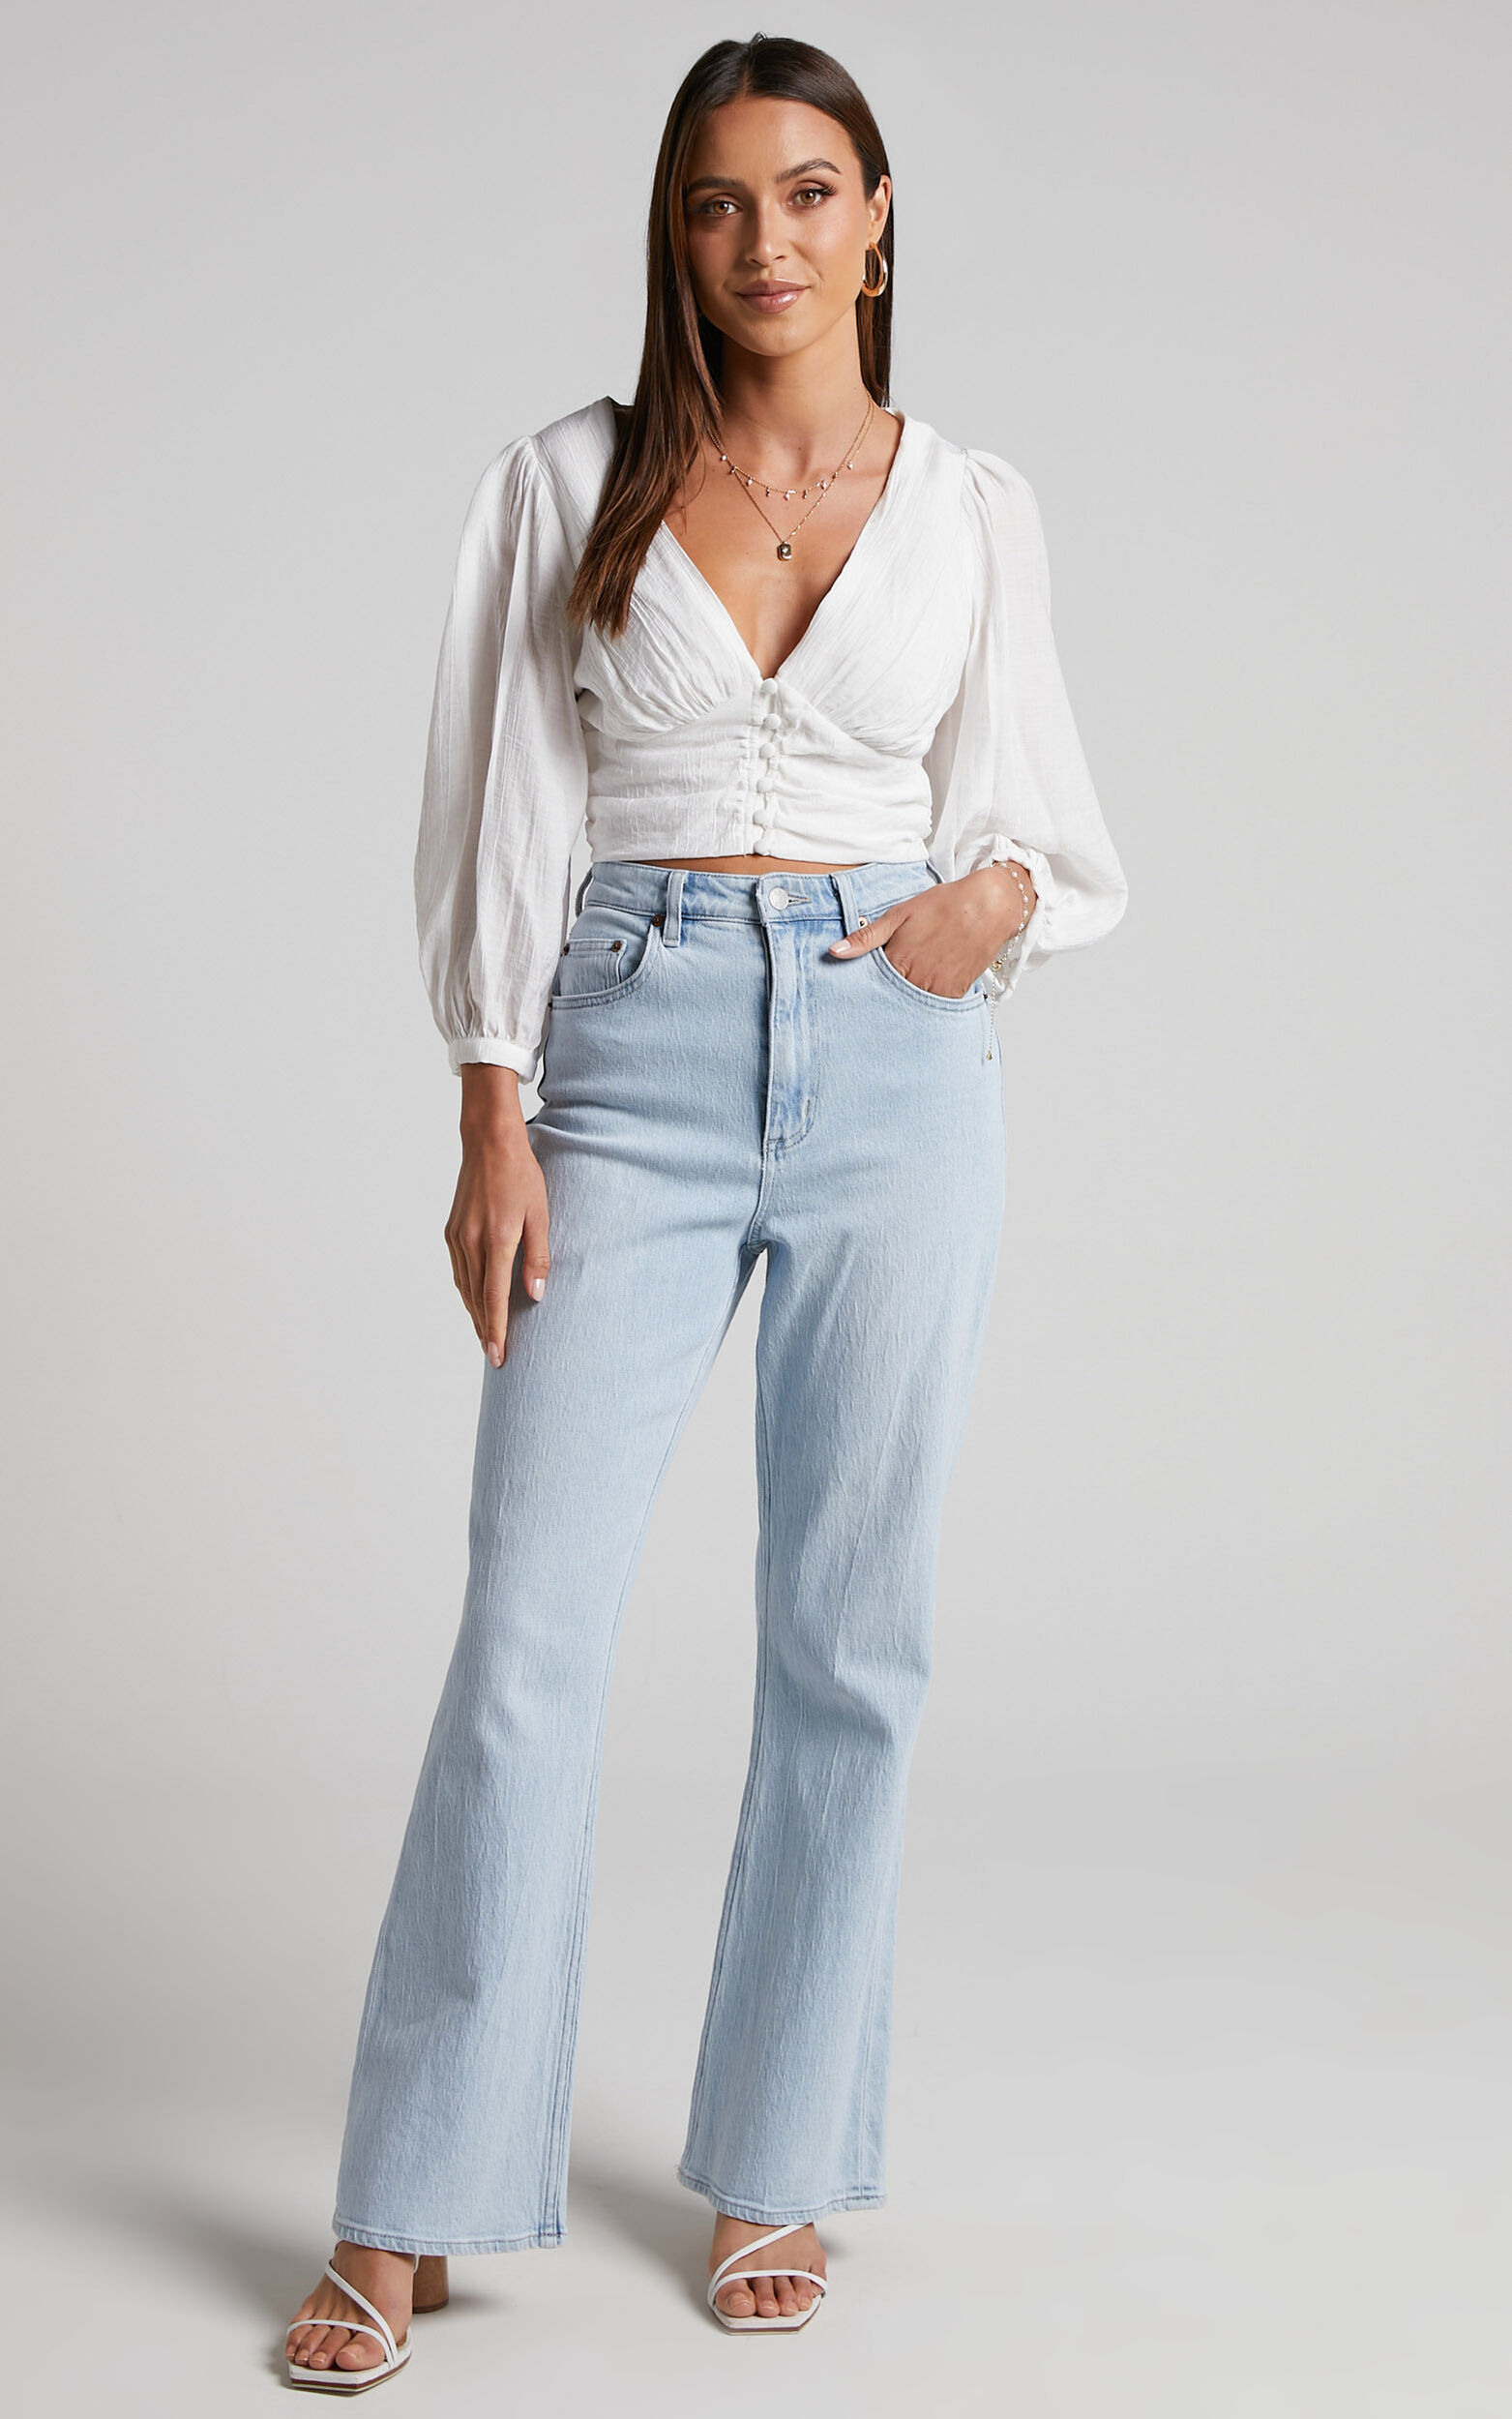 Lancey Top - Long Sleeve Plunge Crop Top in White